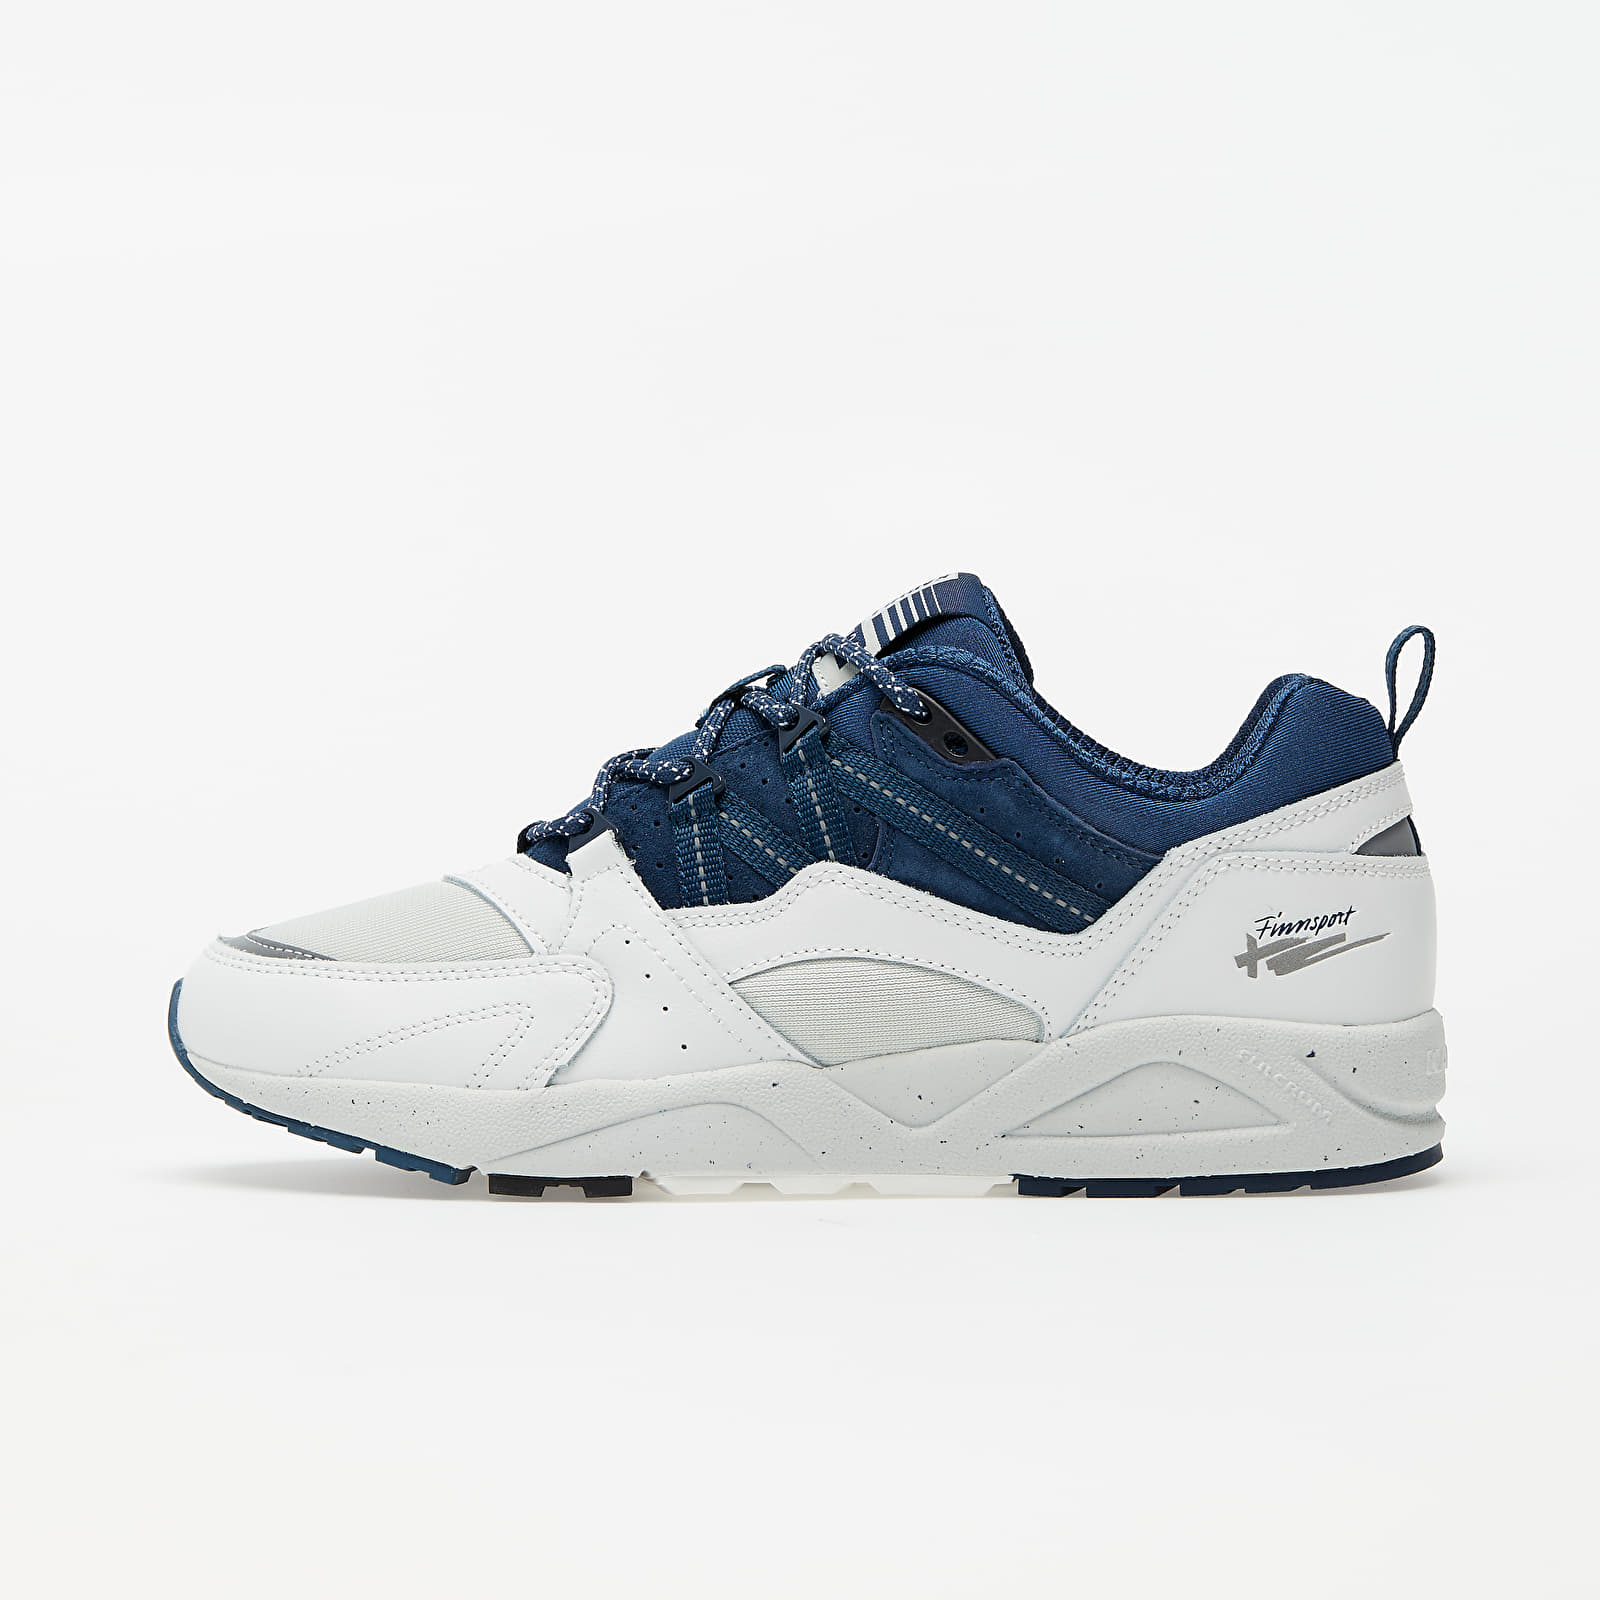 Chaussures et baskets homme Karhu Fusion 2.0 White/ Blue Wing Teal